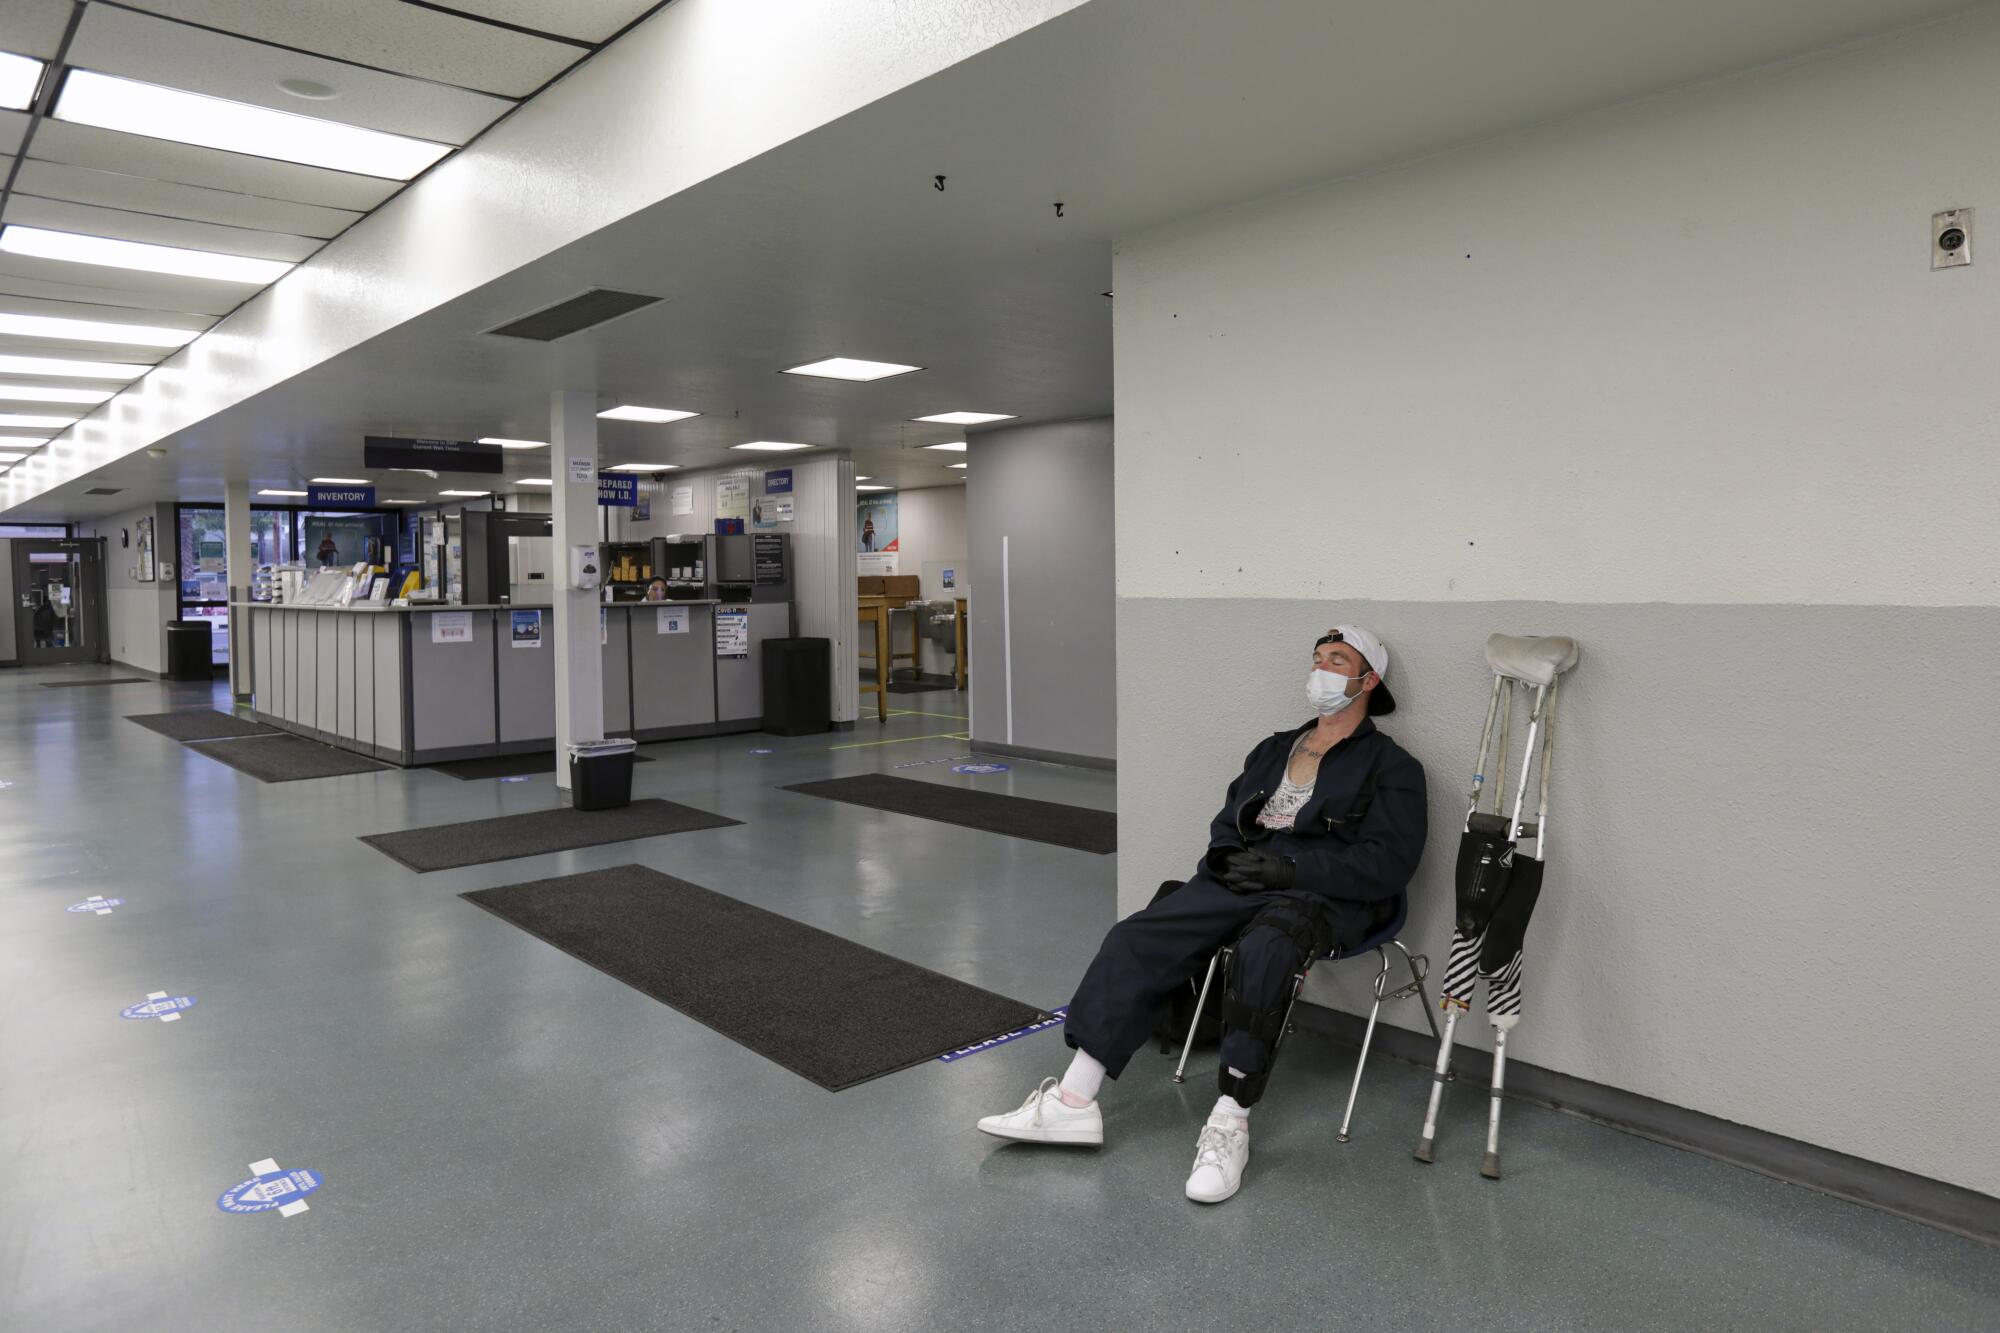 A man dozes off sitting in an chair next to a pair of crutches inside an empty DMV field office